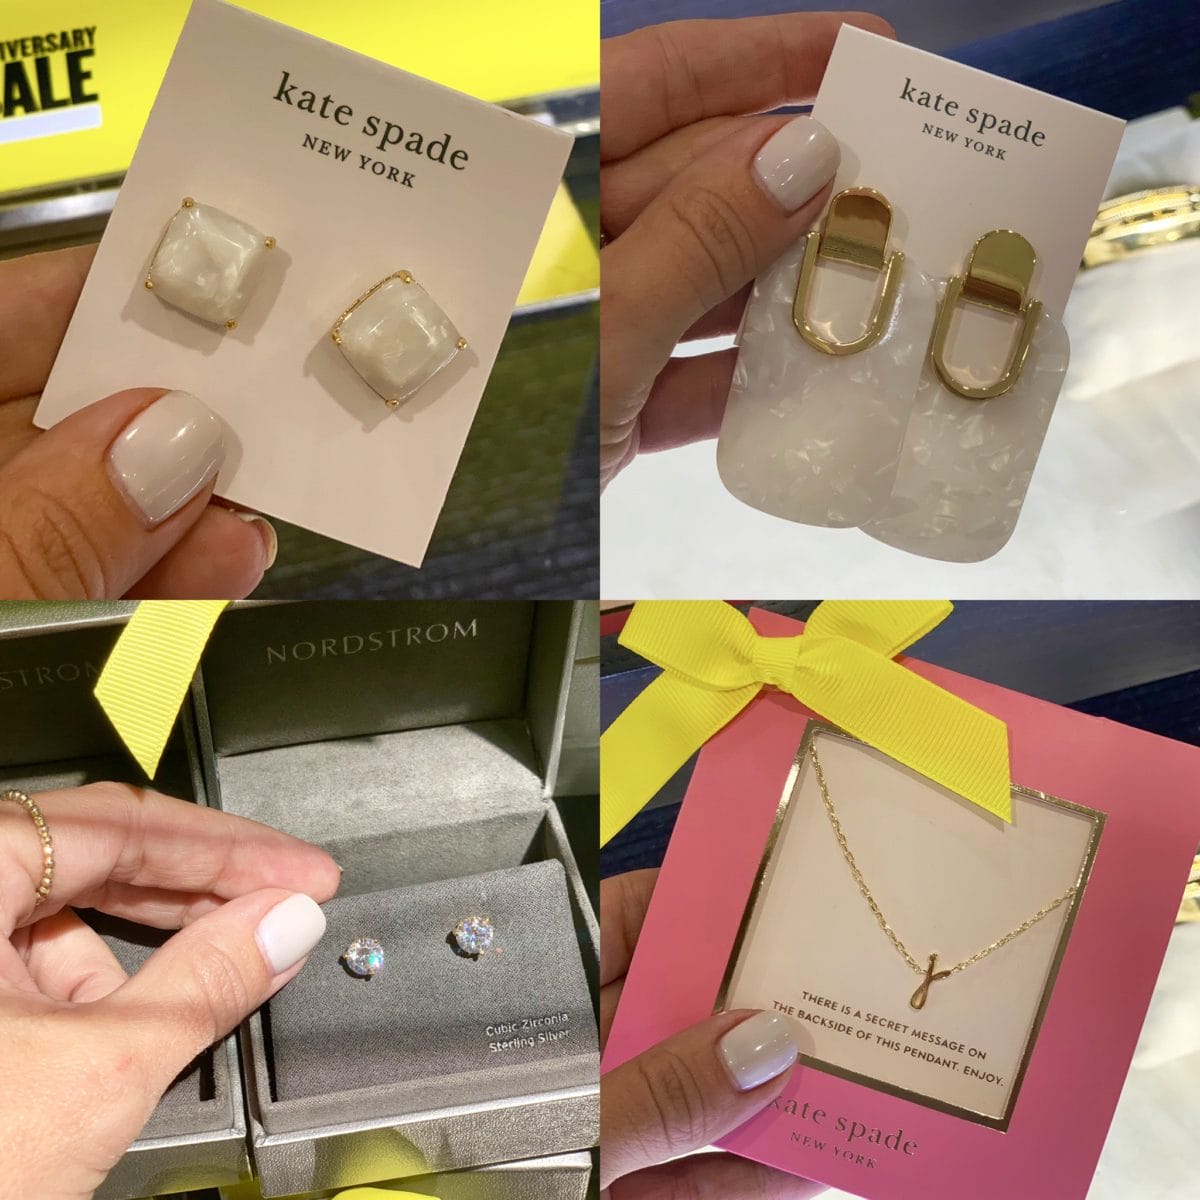 Nordstrom Anniversary Sale - Kate spade earrings and necklace with nordstrom earrings